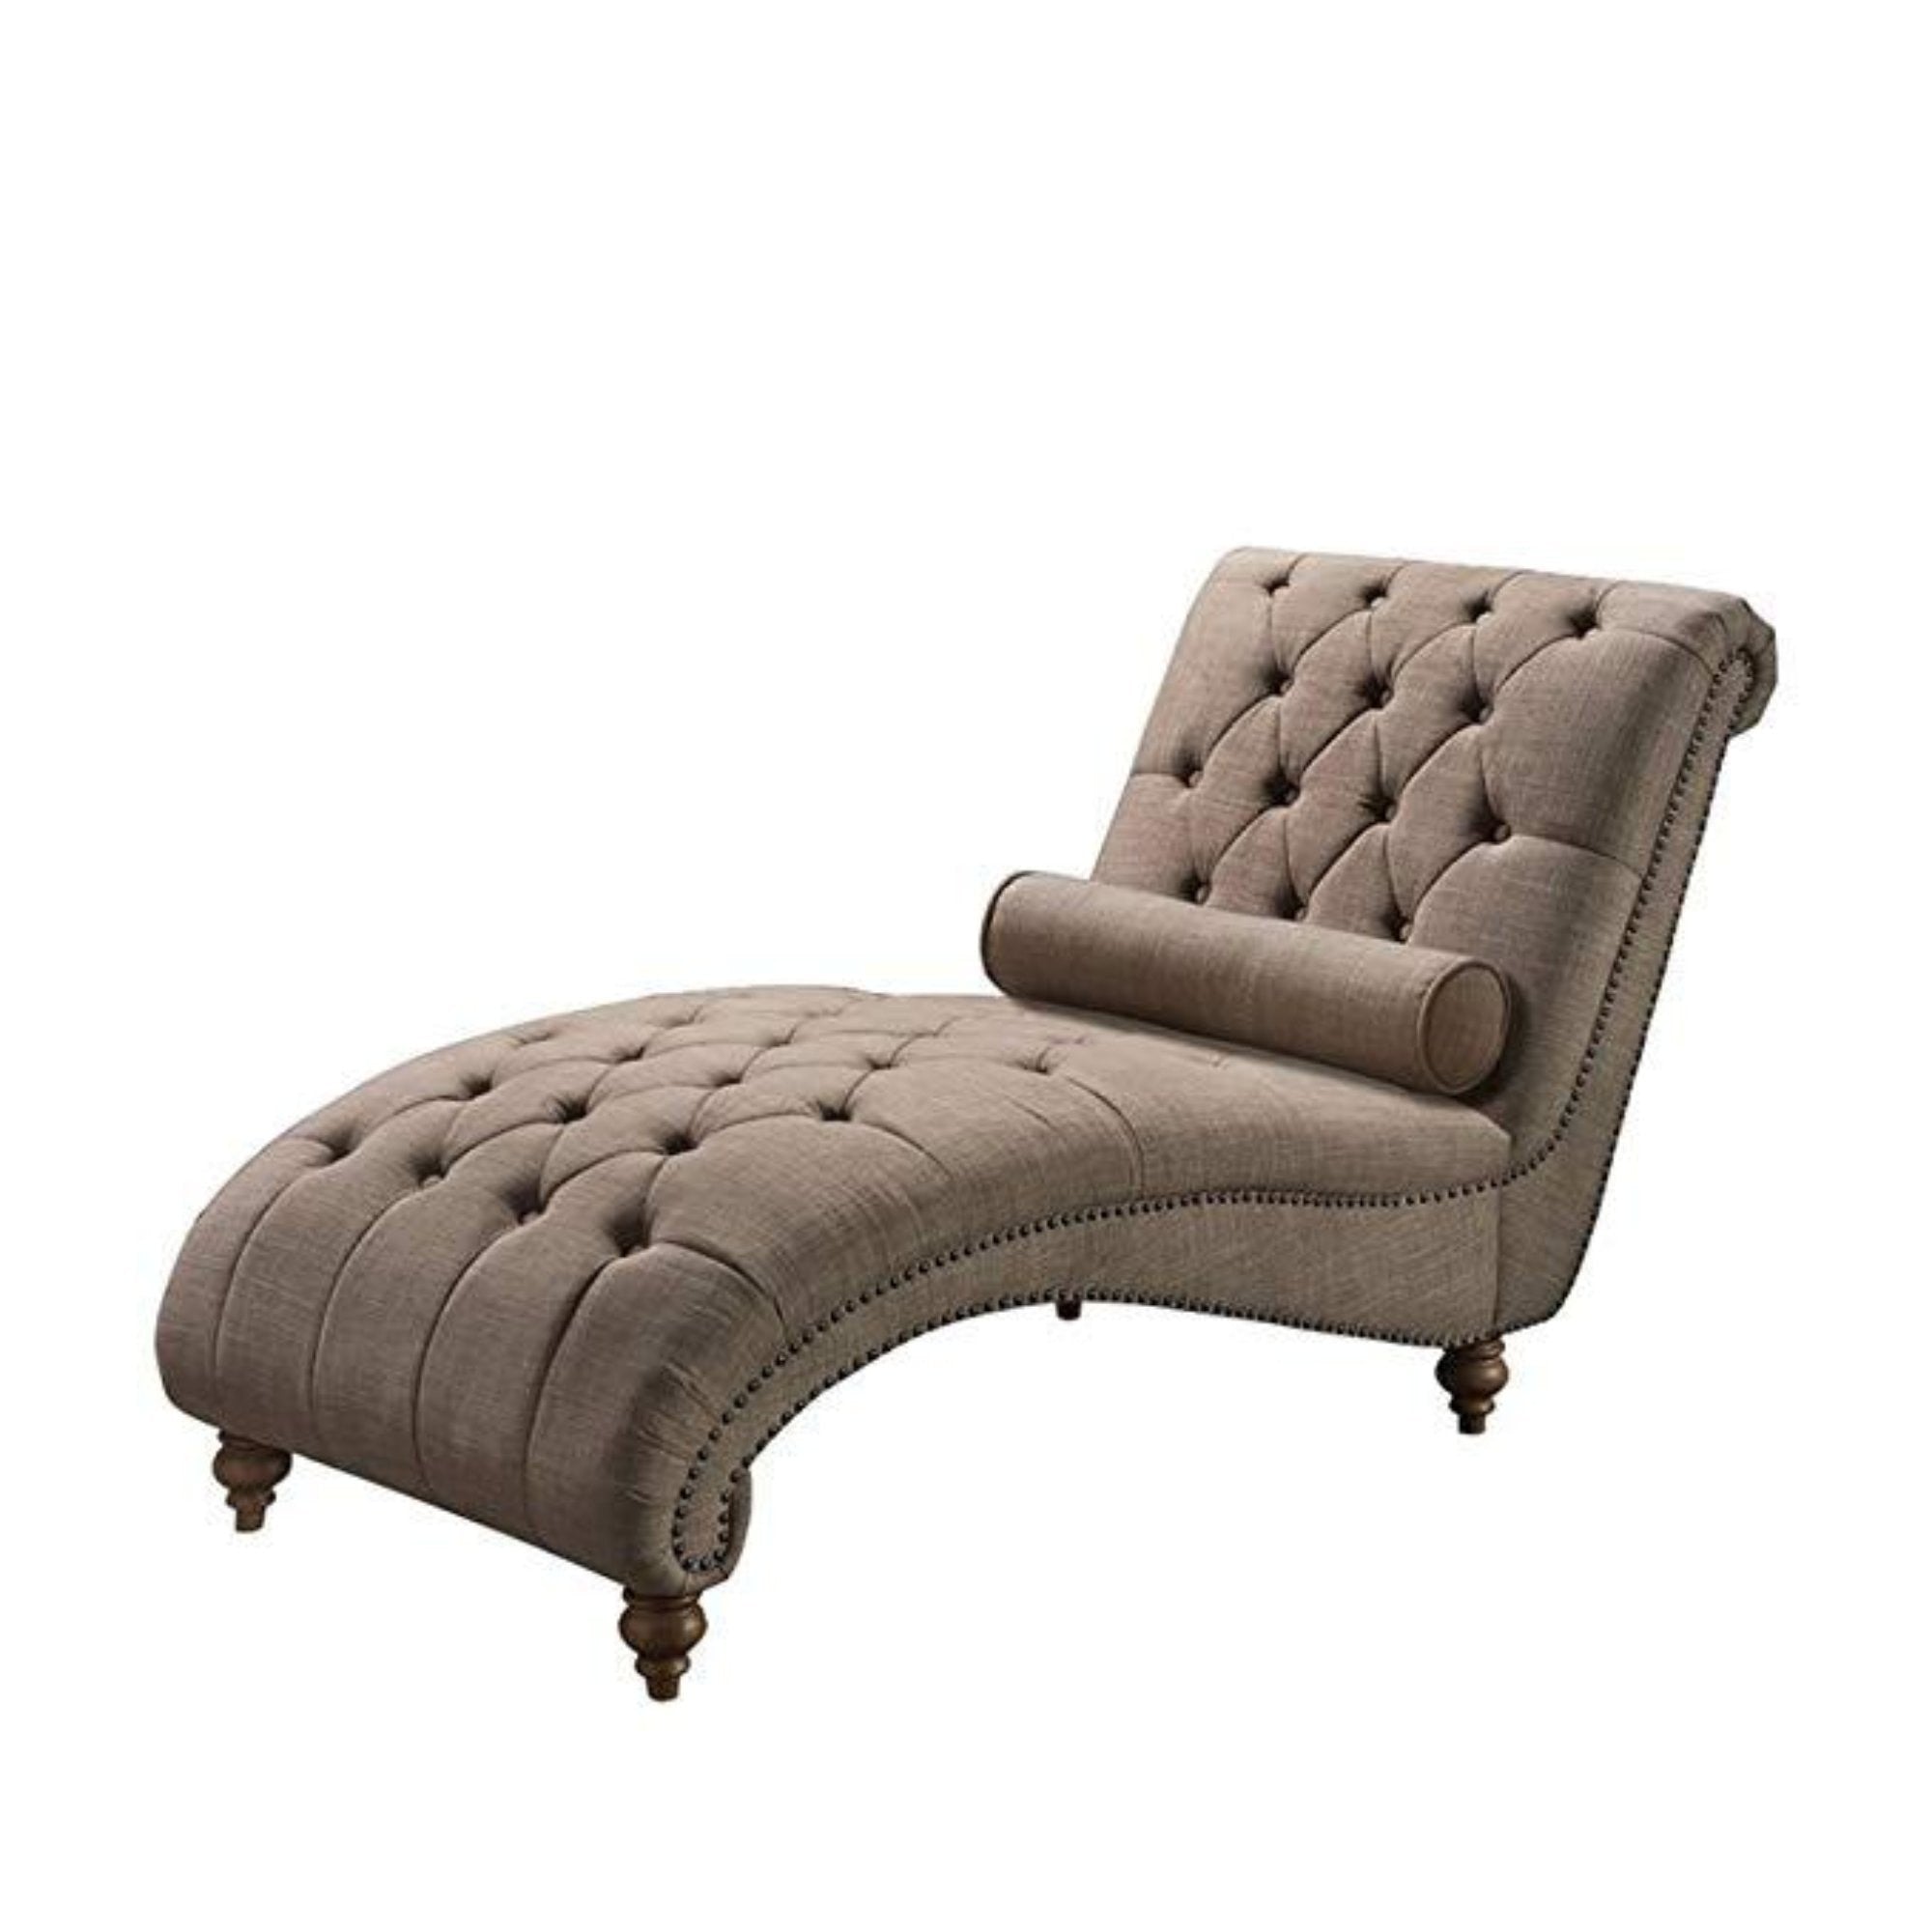 Luxorious Indoor Chaise Lounge Chair - Contemporary Tufted Living Room